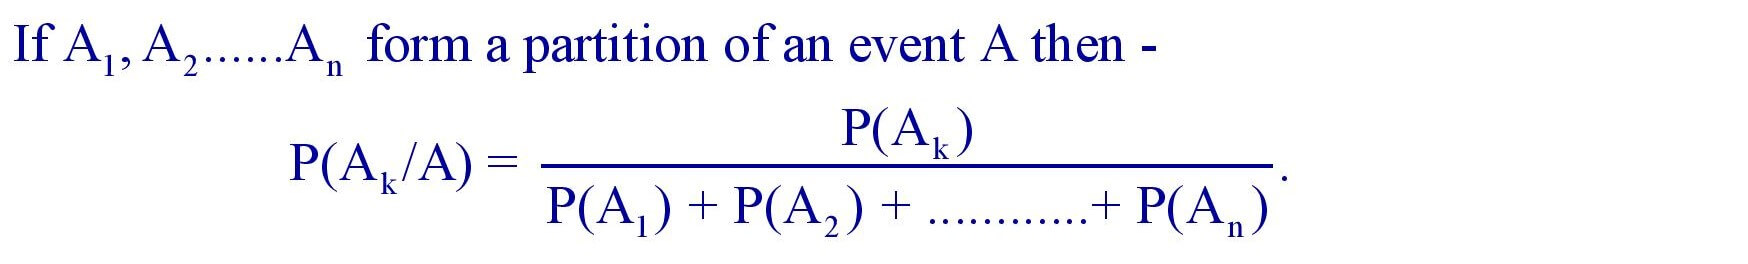 Special Case of Bayes's Theorem